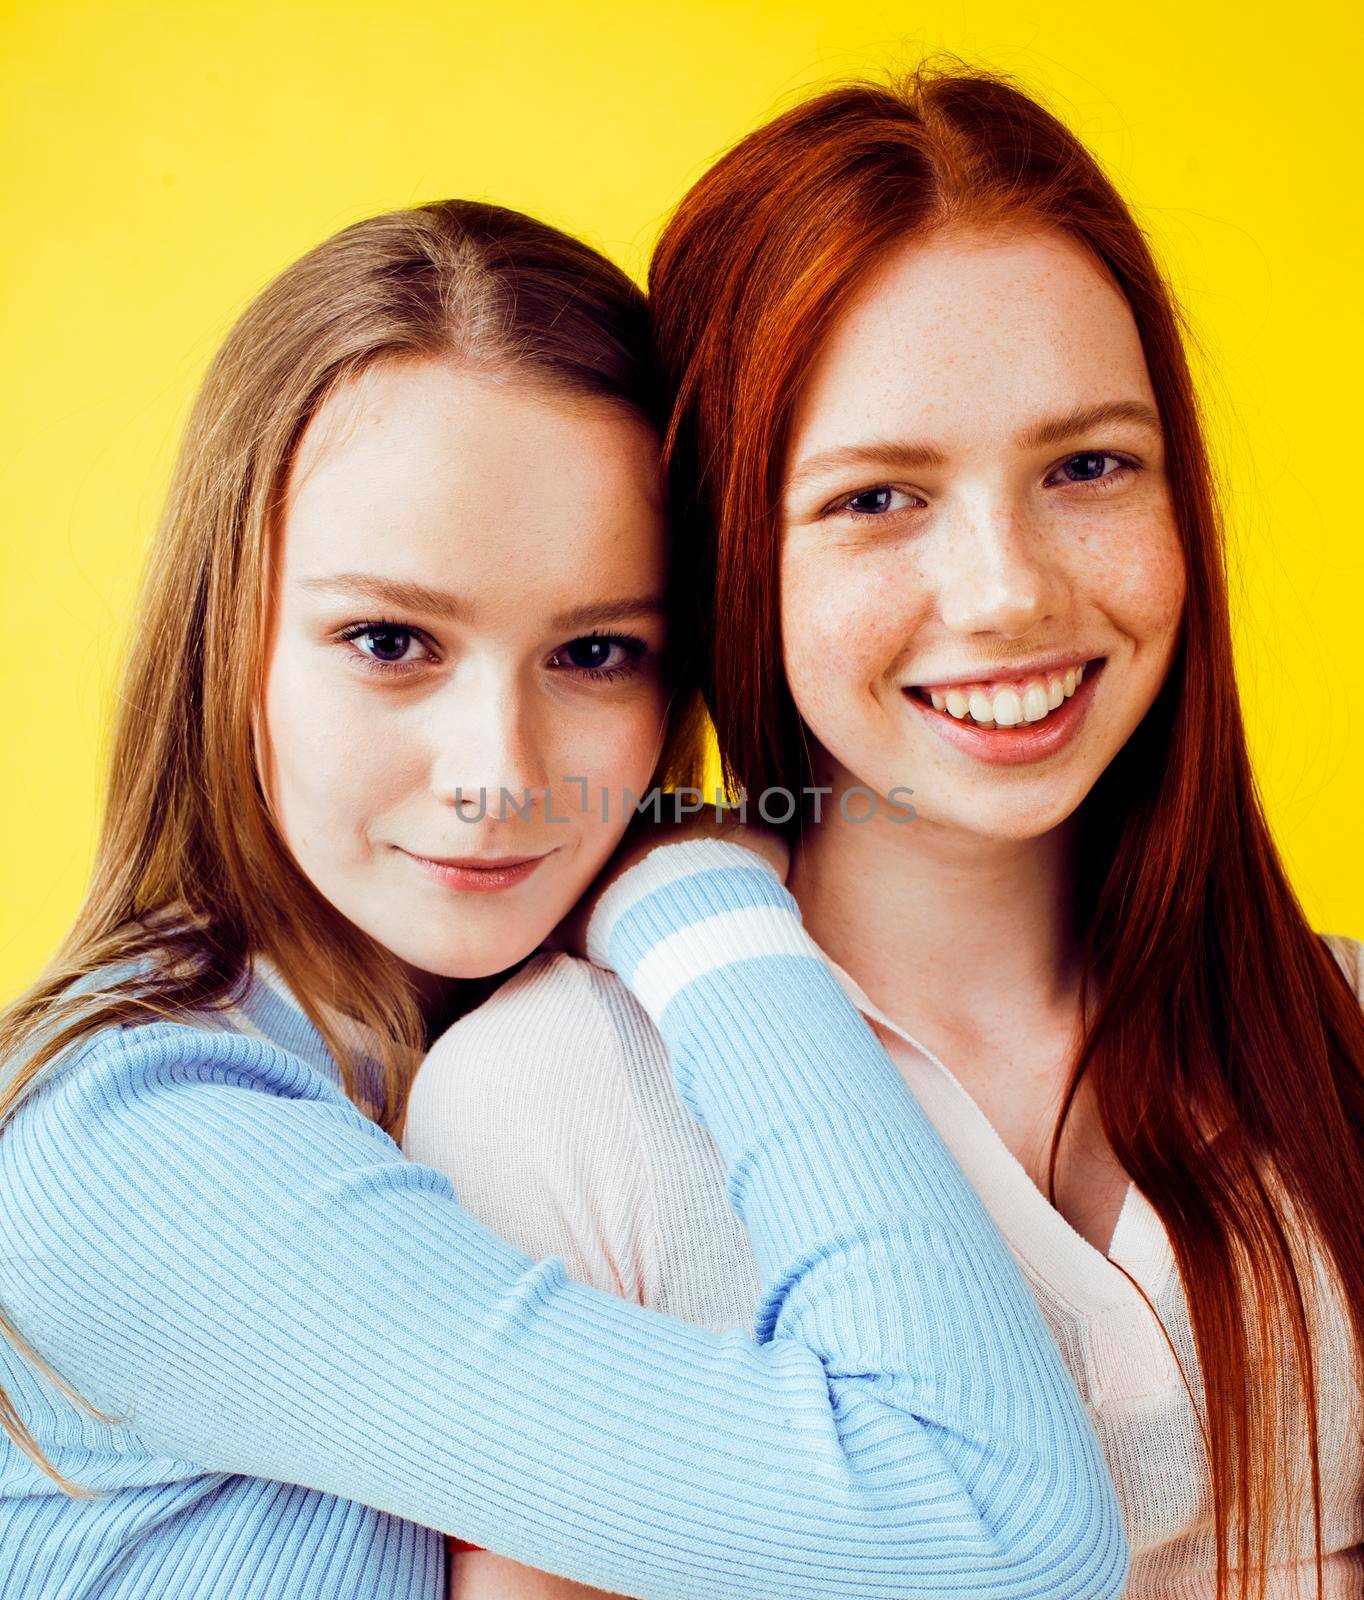 lifestyle people concept: two pretty young school teenage girls having fun happy smiling on yellow background closeup